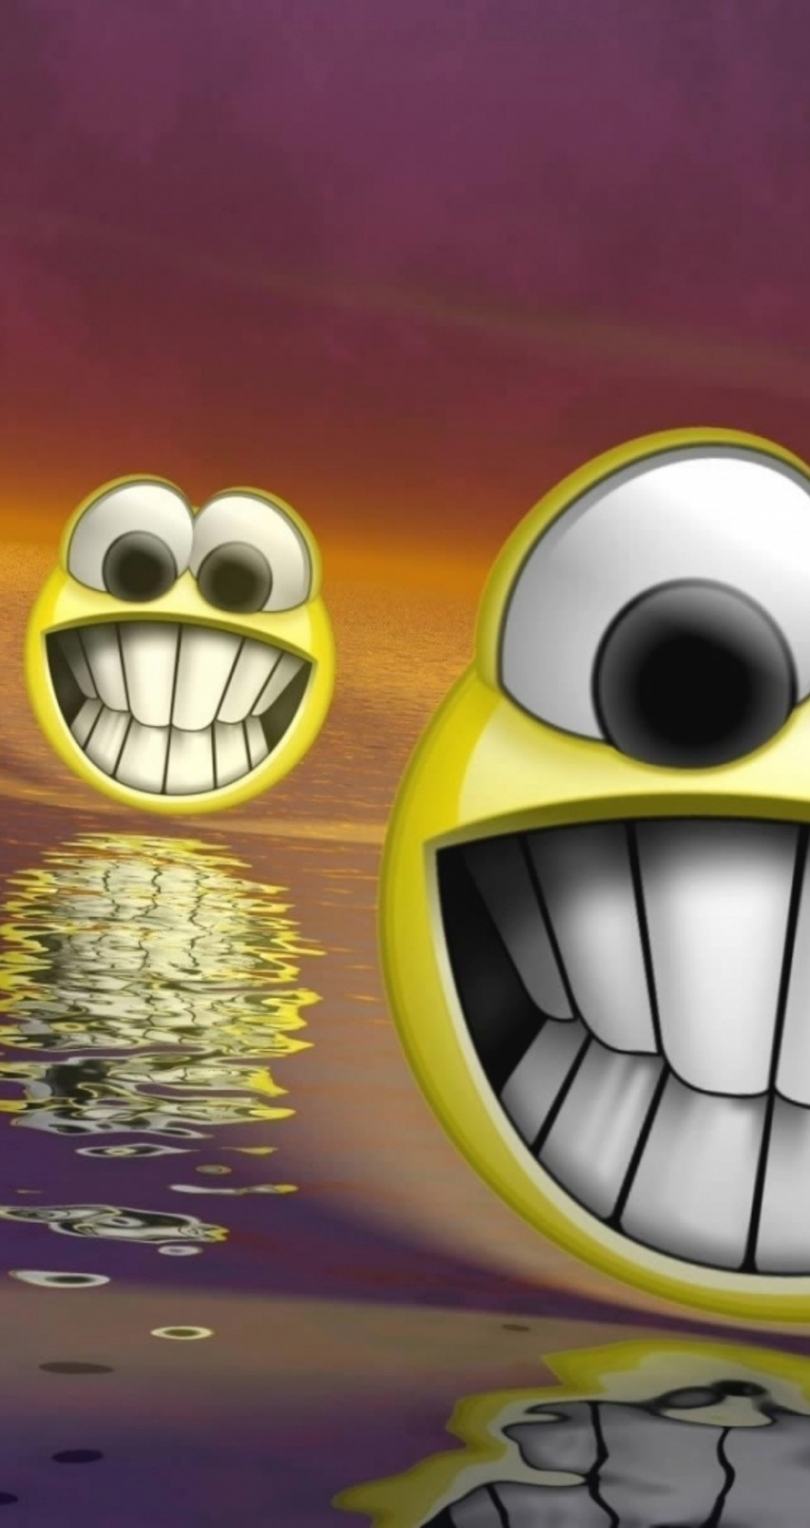 Funny Smiley Faces Float On Water - Smile - HD Wallpaper 